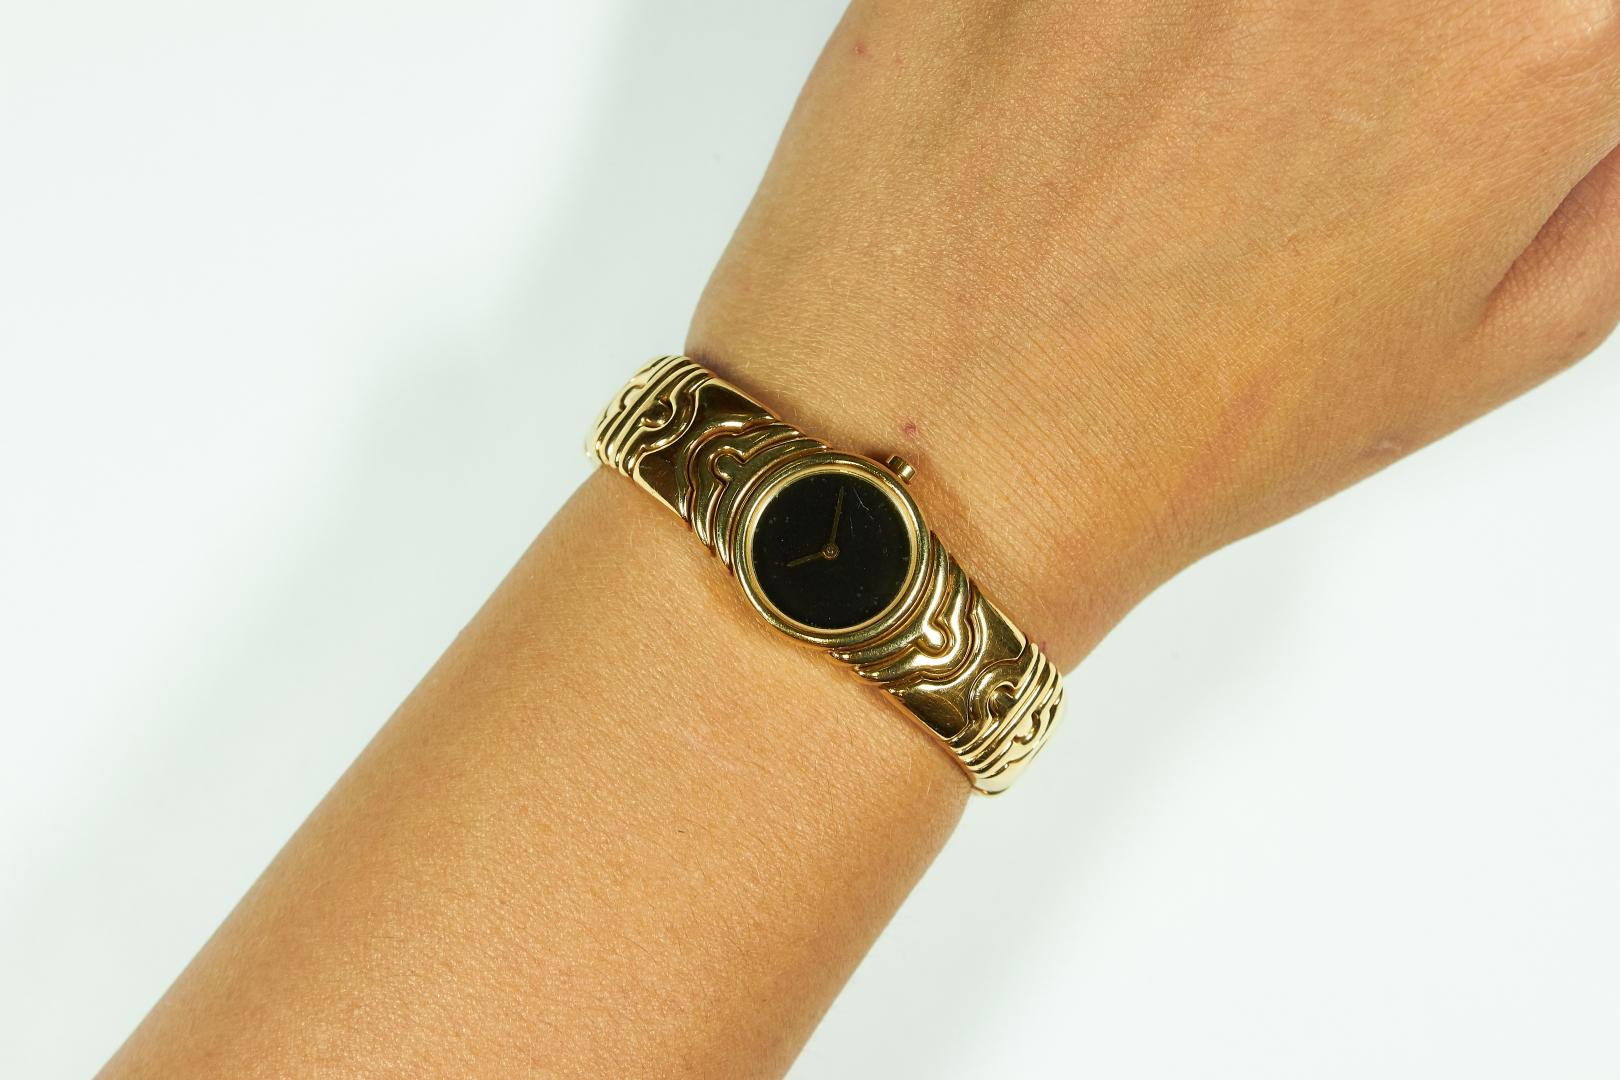 Bvlgari Parentesi Watch in 18kt Yellow Gold with Black Dial, and quartz movement
Made in Italy Circa 1980, black dial and quartz movement.
Bracelet and case 20mm signed Bulgari.
Measurements: Wrist 6.5.